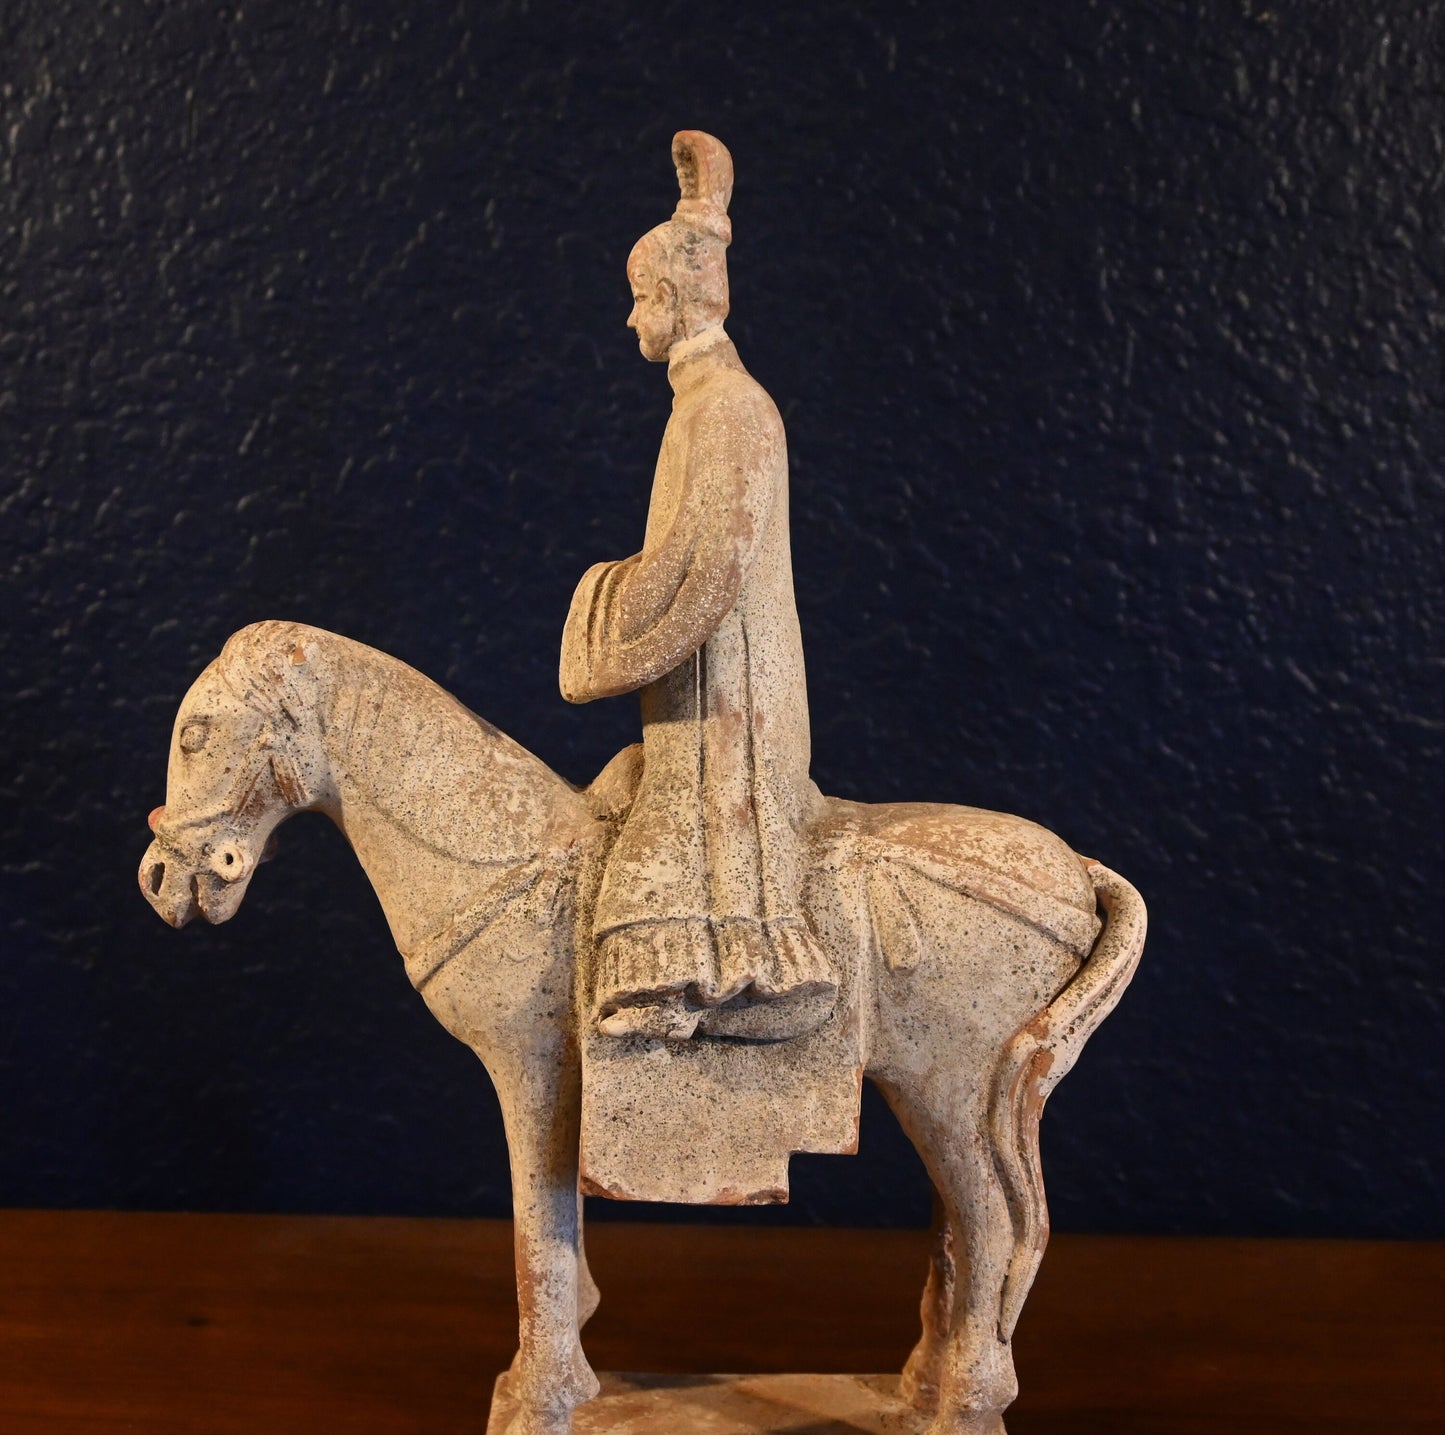 Elegant Authentic Ming Dynasty Pottery Horse and Rider Circa 1368–1644 AD Certificate of Authenticity & Provenance 13 5/8 inches in height